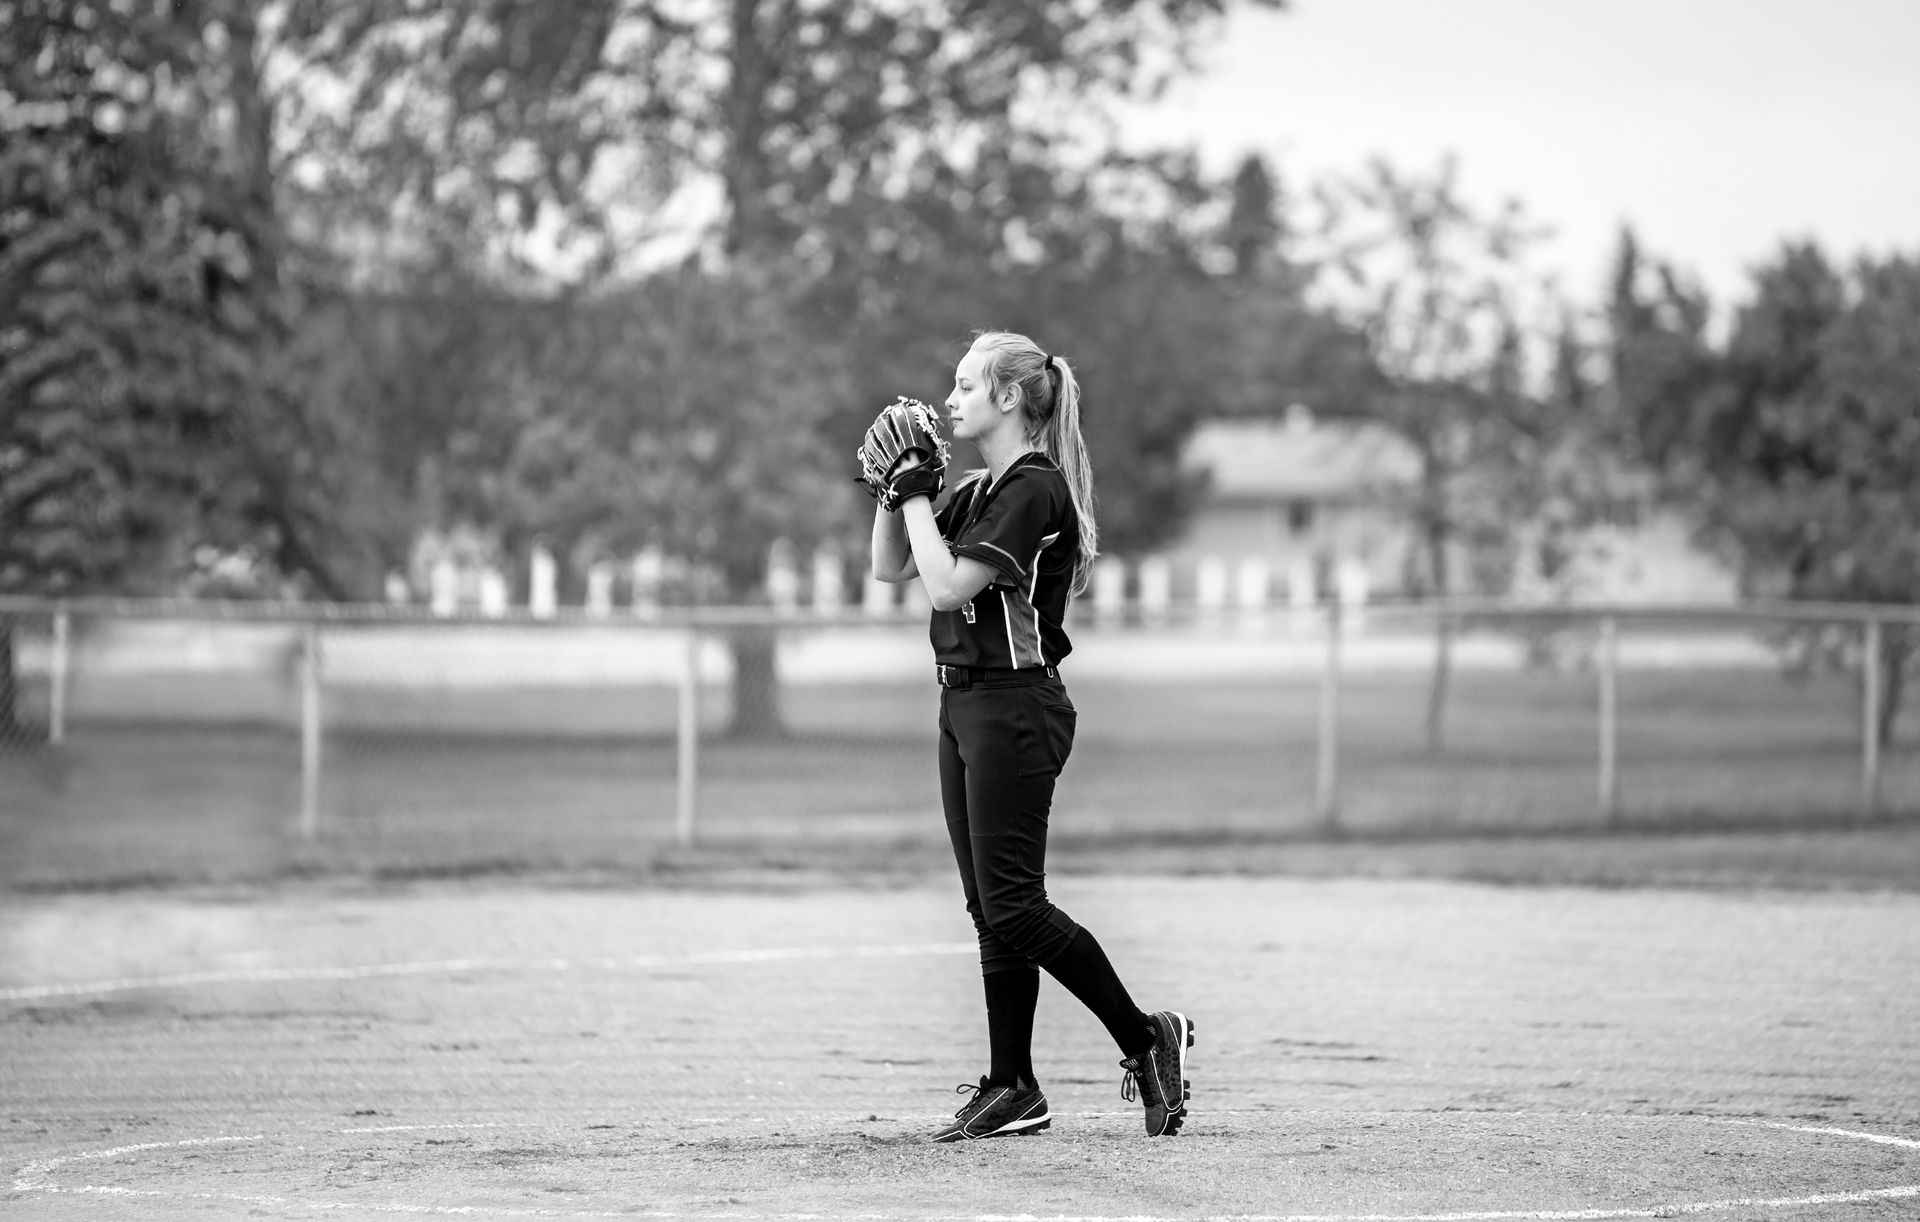 A black and white photo of a girl playing softball on a field.